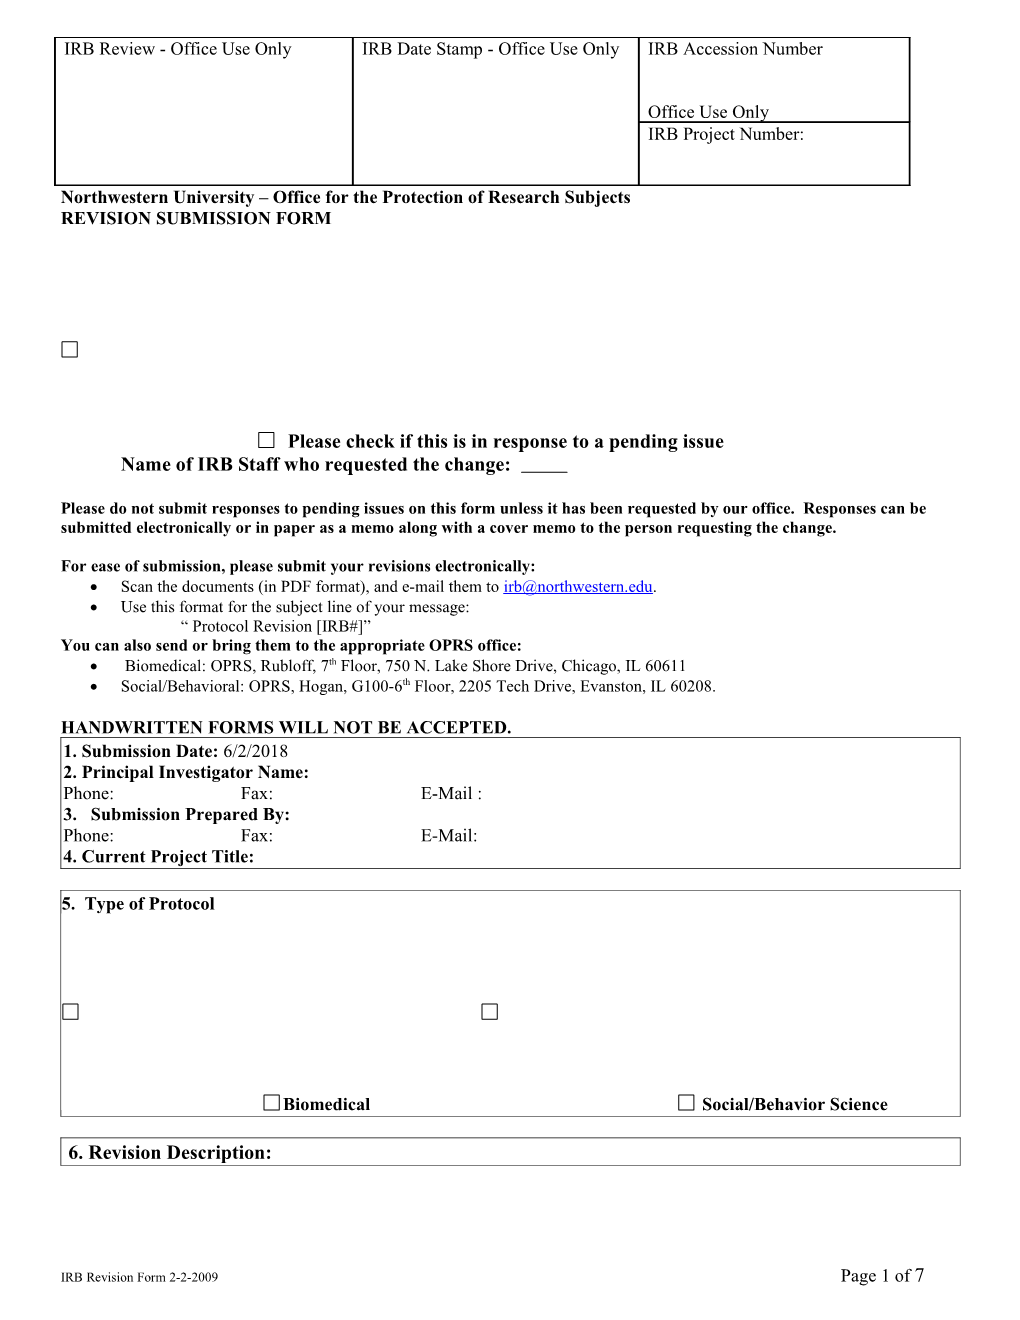 Adverse Event Report Form s1